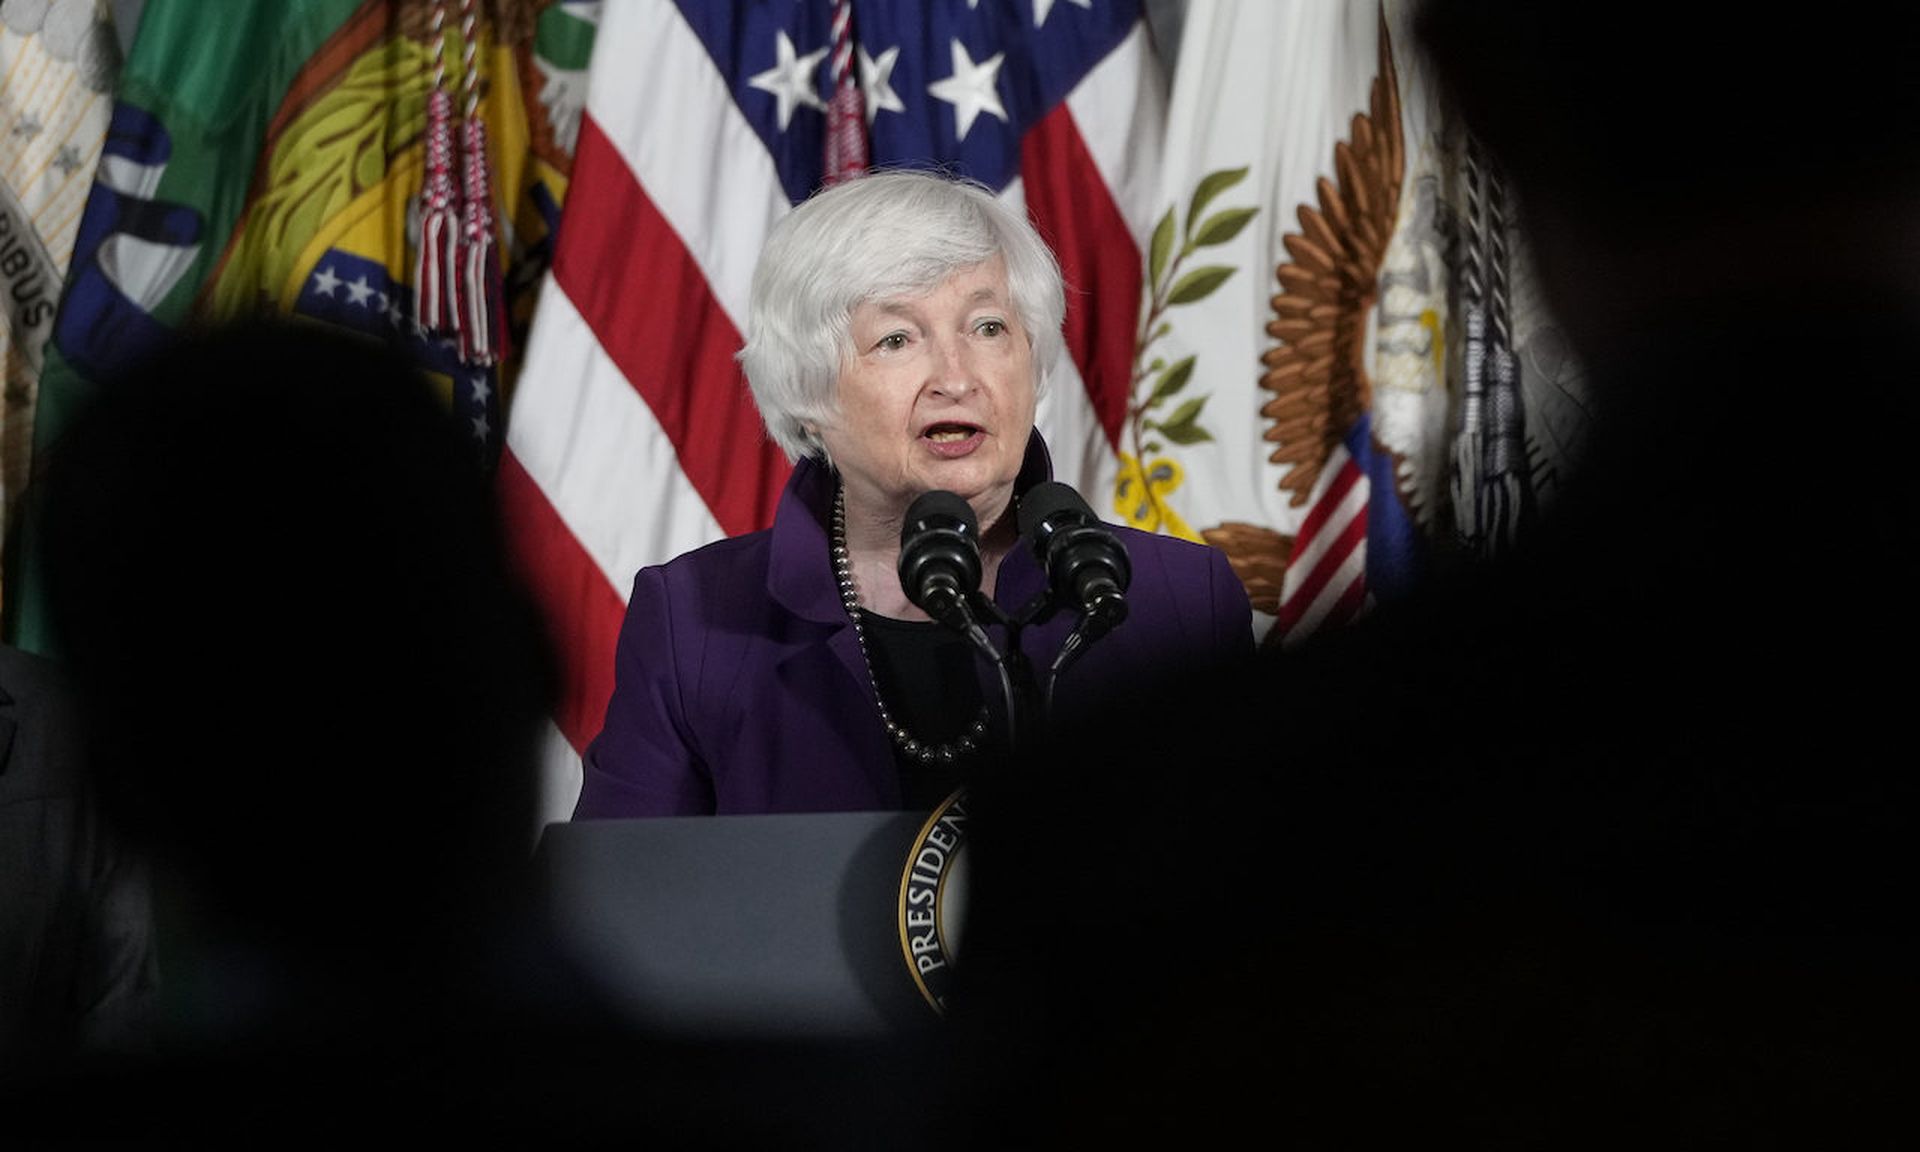 Treasury Secretary Janet Yellen  speaks during an event at the U.S. Department of the Treasury on September 15, 2021 in Washington, D.C. (Photo by Drew Angerer/Getty Images)